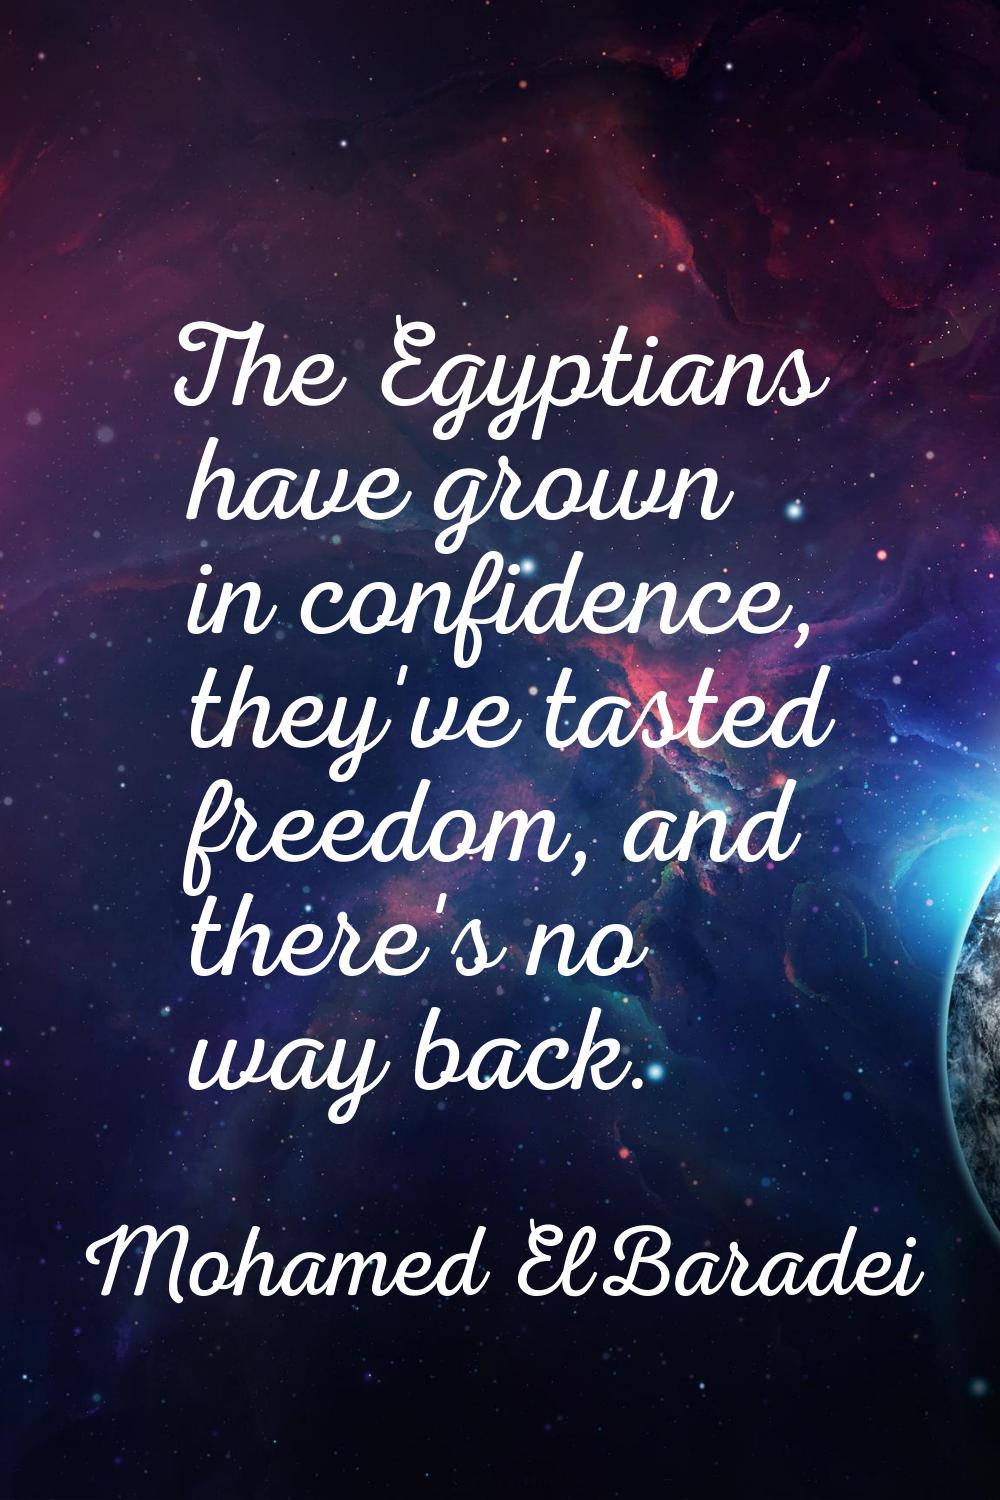 The Egyptians have grown in confidence, they've tasted freedom, and there's no way back.